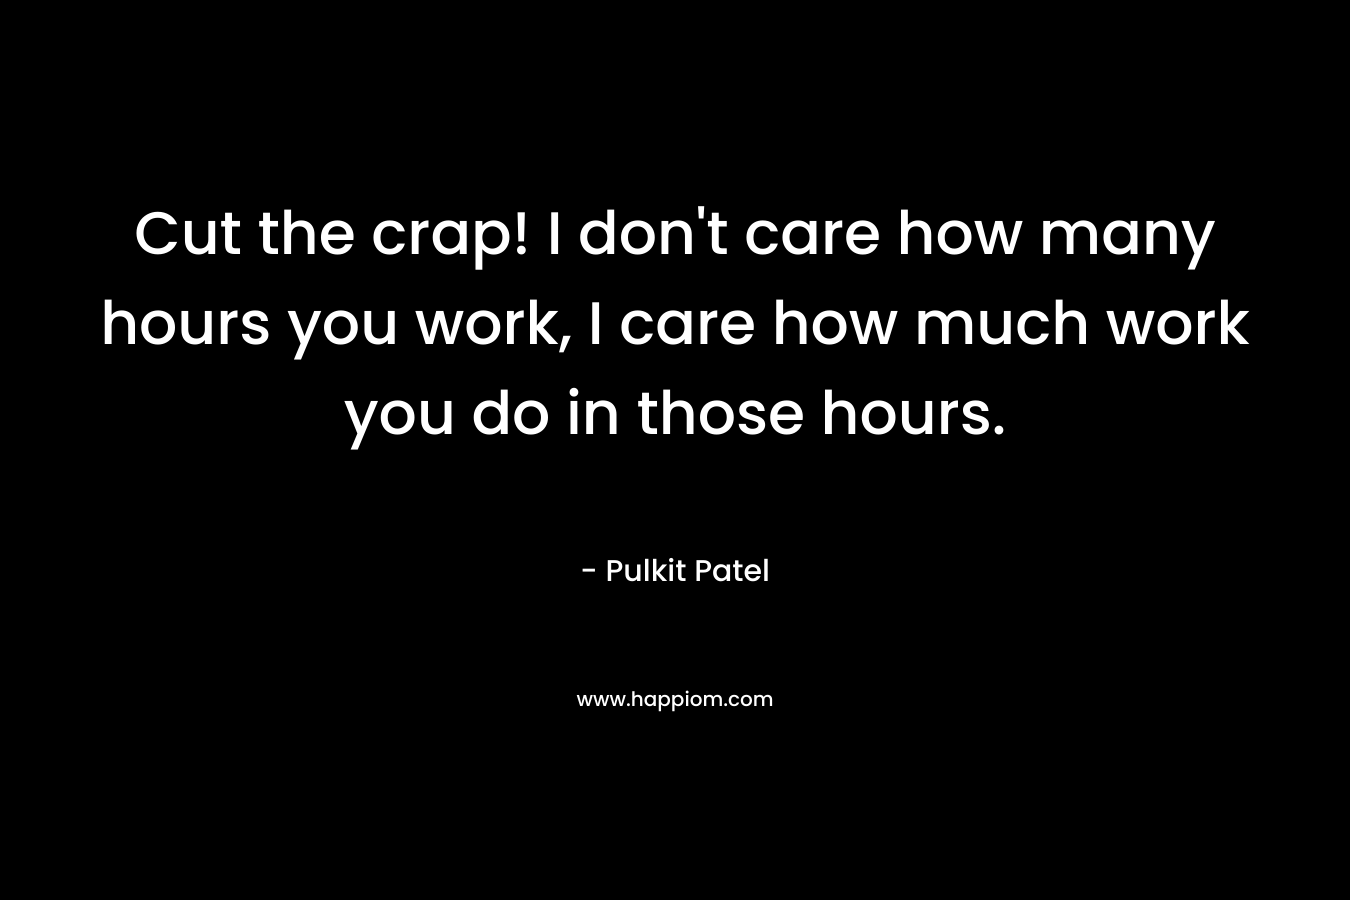 Cut the crap! I don't care how many hours you work, I care how much work you do in those hours.